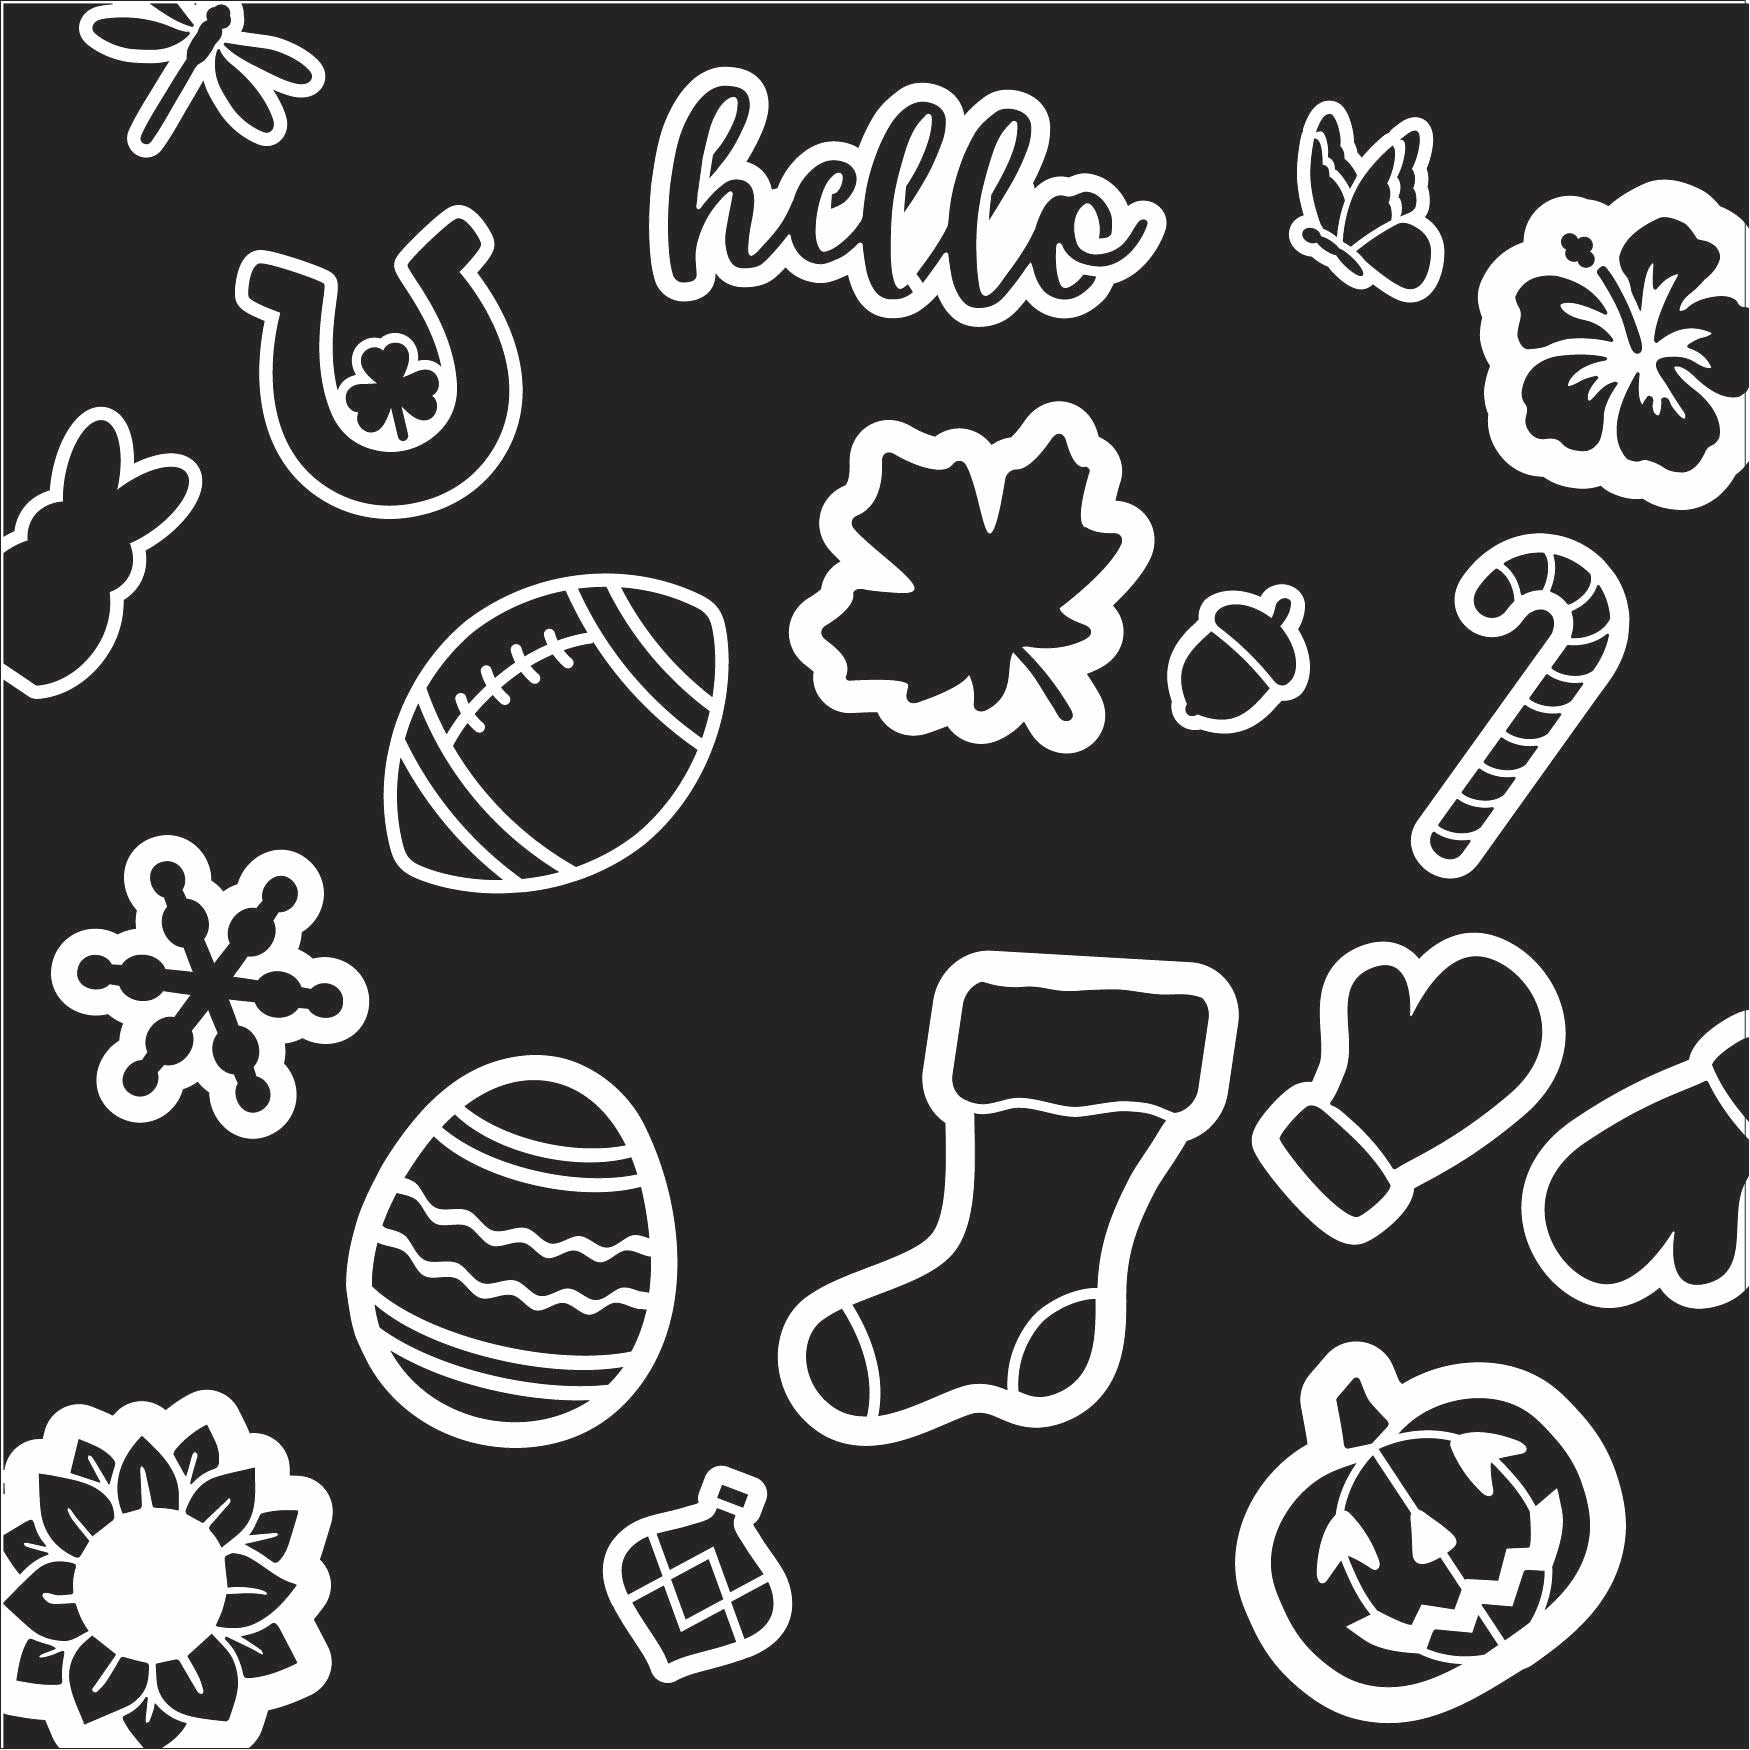 Plata Chalkboards magnetic reusable stencil designs for chalkboard art and chalkboard lettering for easy holiday crafts